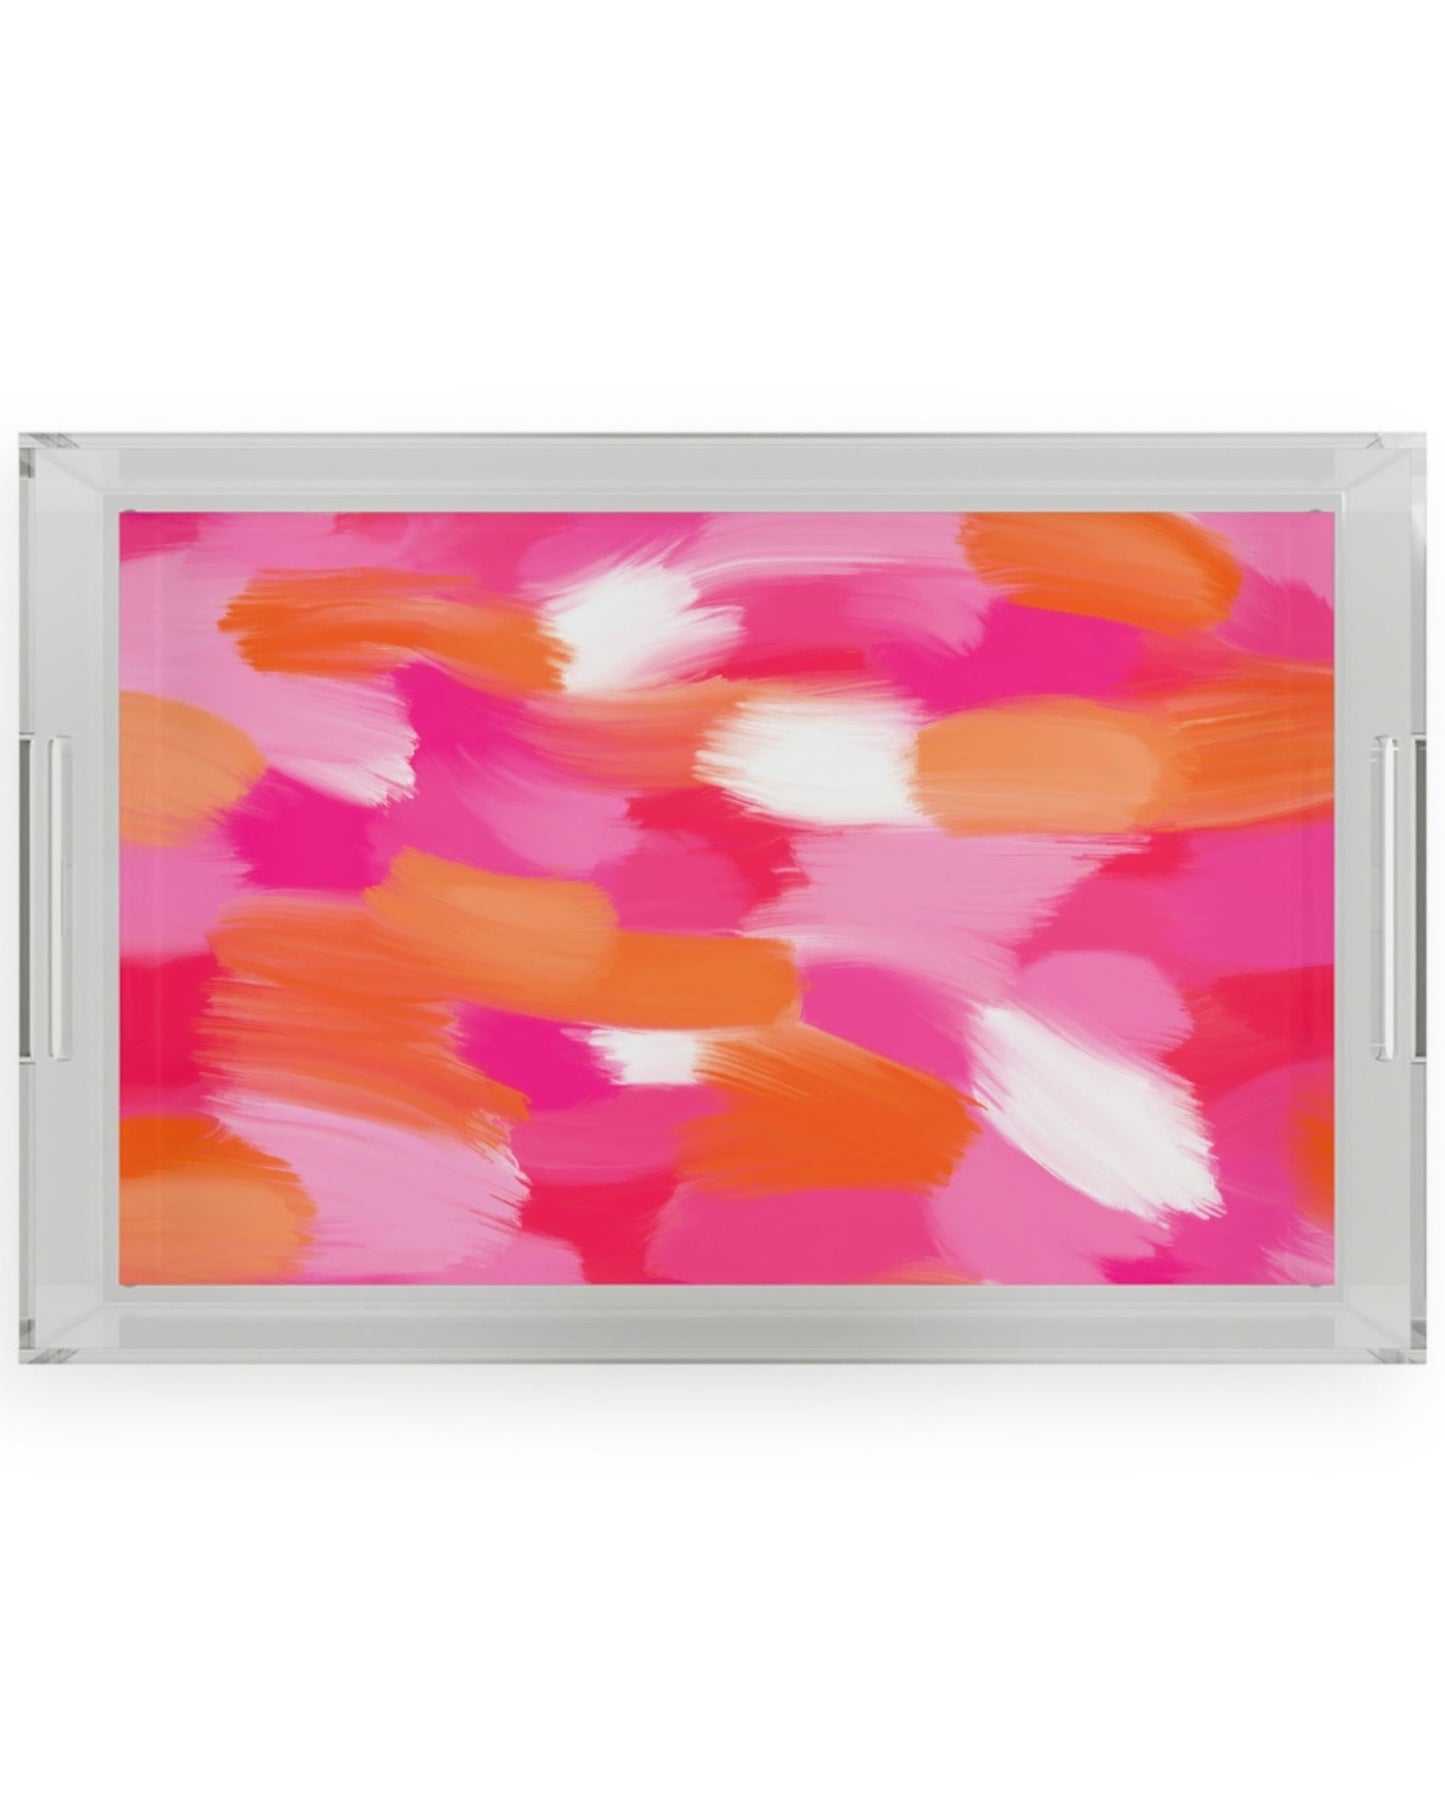 Serving Tray - Pink And Orange - BRYKNOLO LLC Home Decor 11" x 17" / Clear